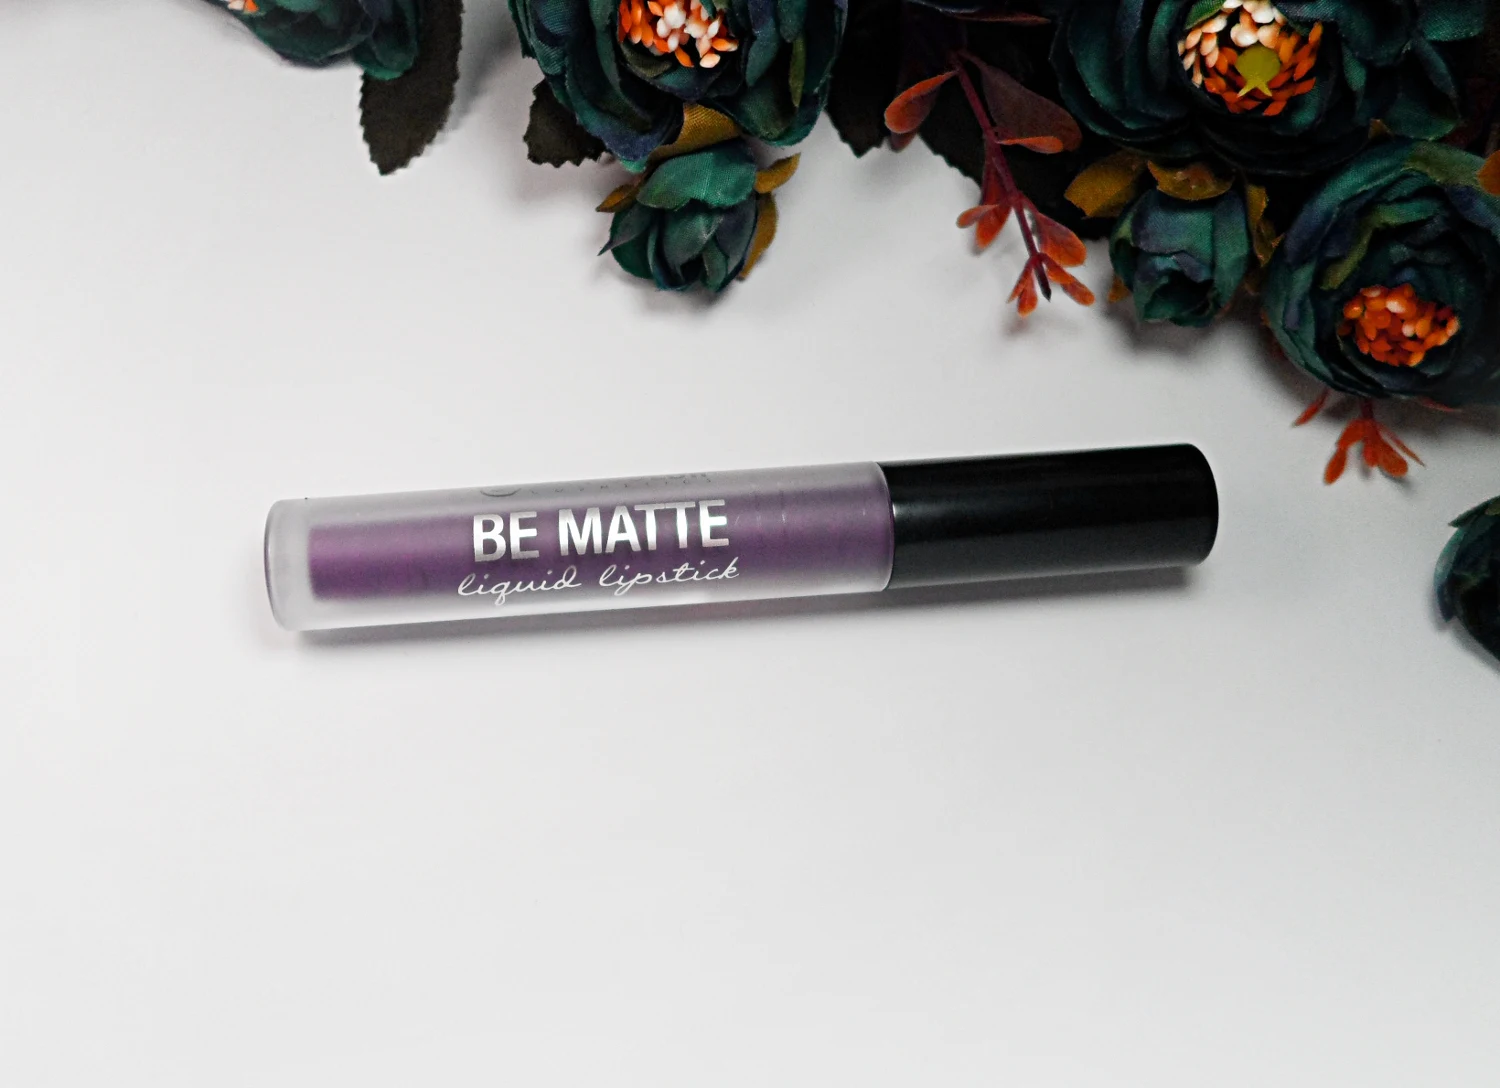 'Be Matte' lipstick by City Color Cosmetics on a white studio's background